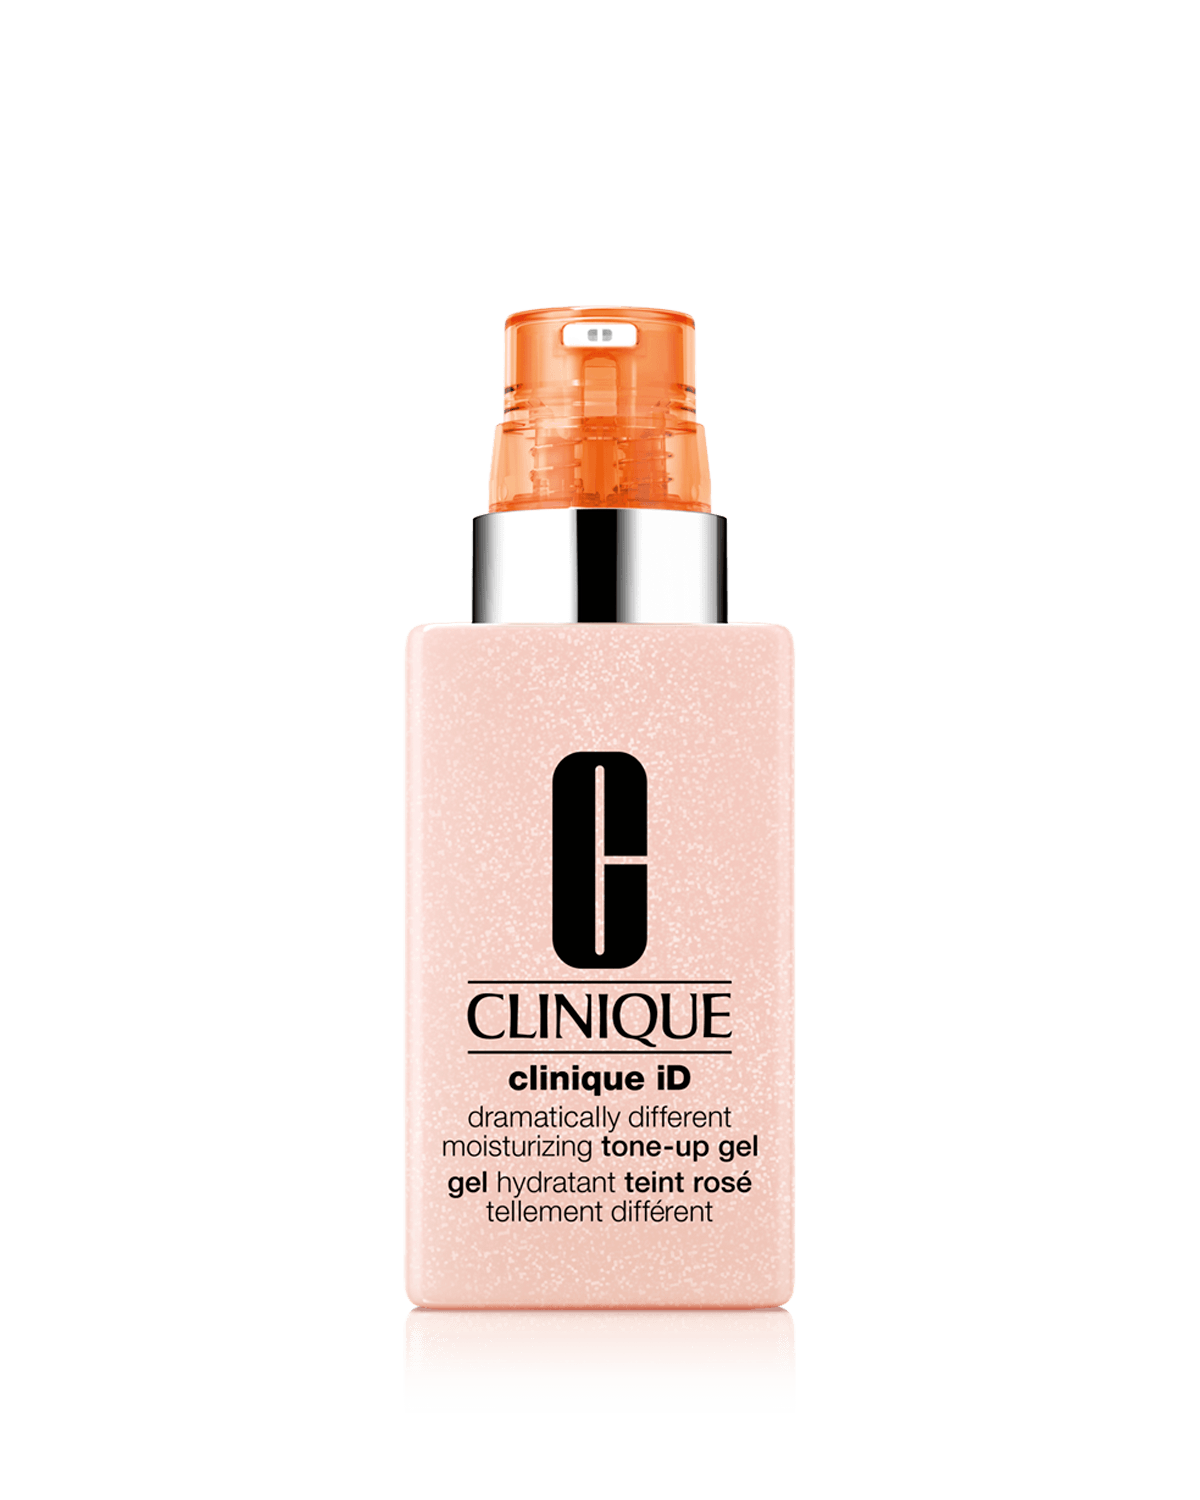 Clinique iD™: Tone-Up Gel Hydration Base + Active Cartridge Concentrate - Fatigue